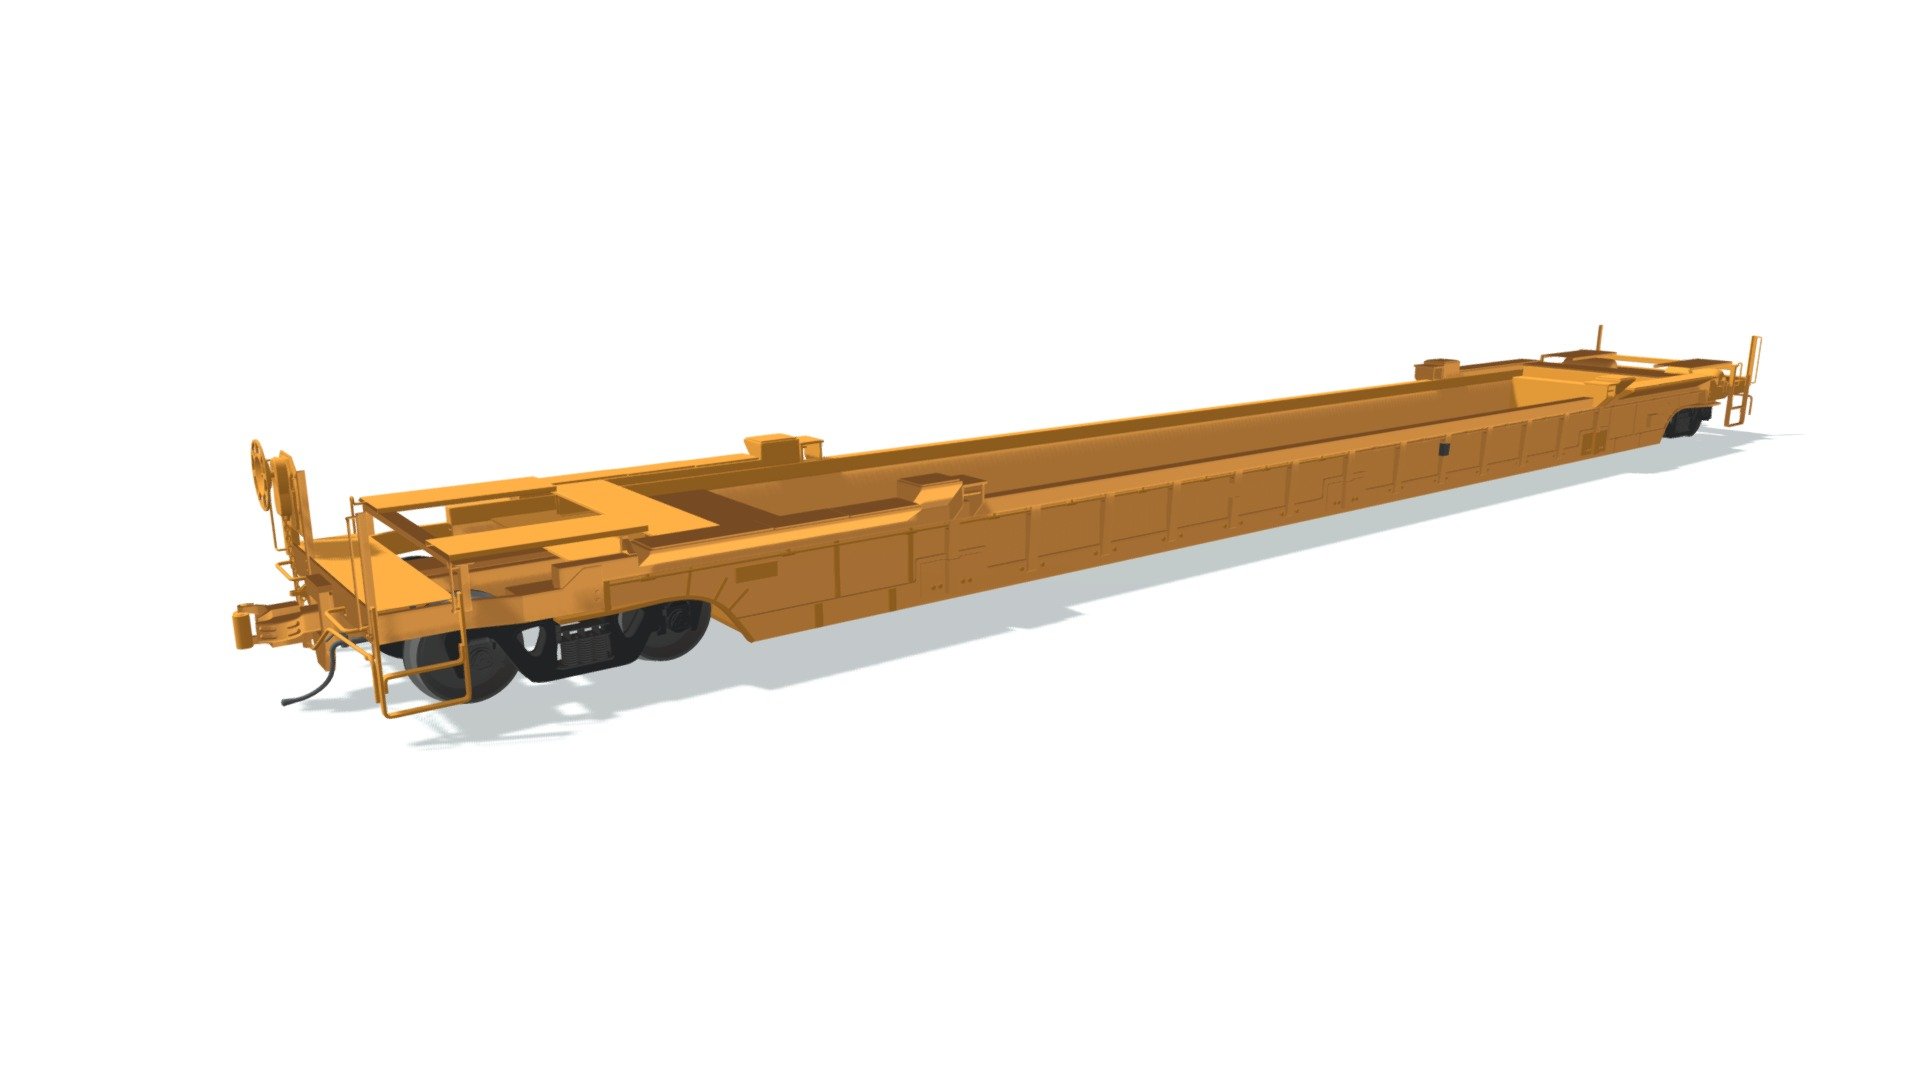 High quality 3d model of railroad double stack car 3d model